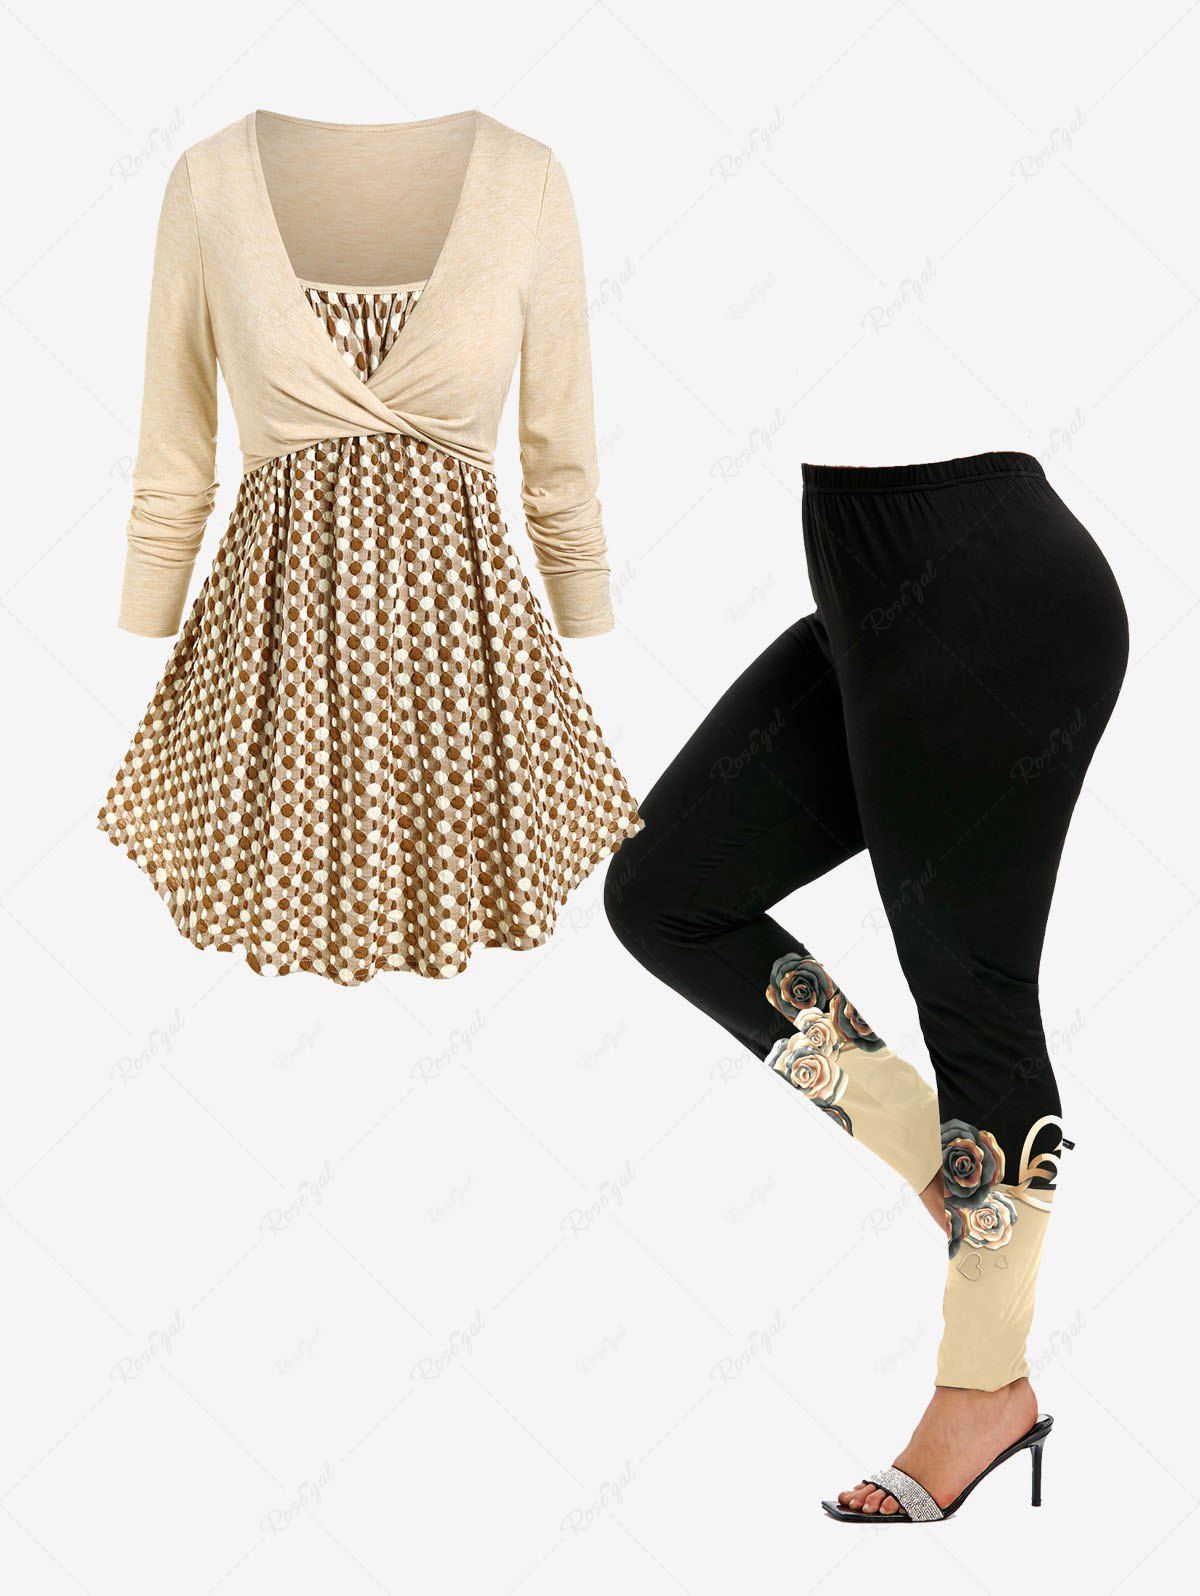 Sale Plus Size Polka Dot Cross Long Sleeves Tunic 2 in 1 Tee and Rose Print Leggings Outfits  